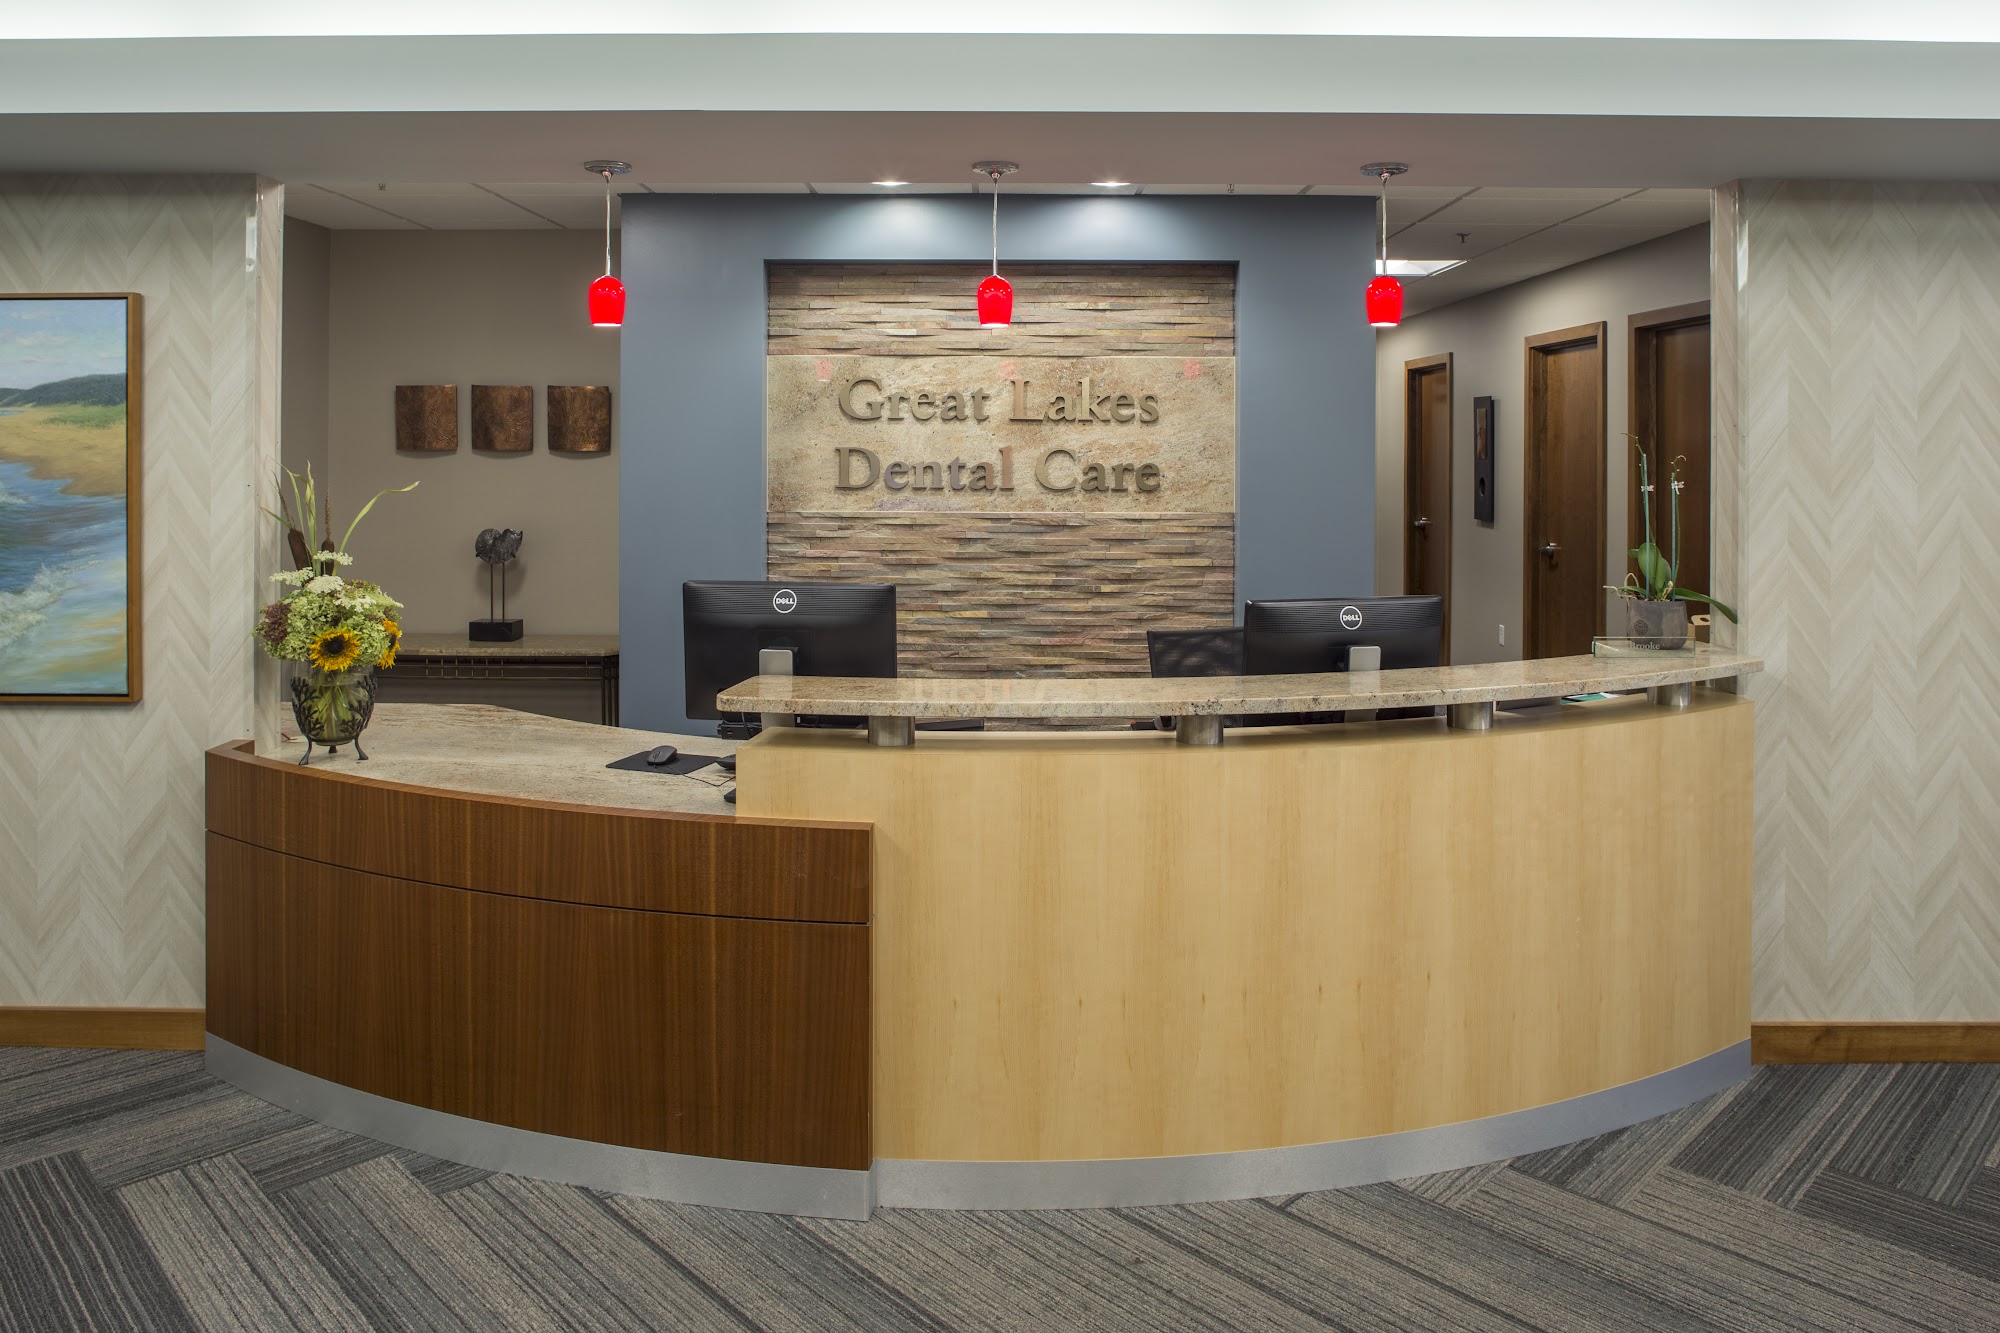 Great Lakes Dental Care